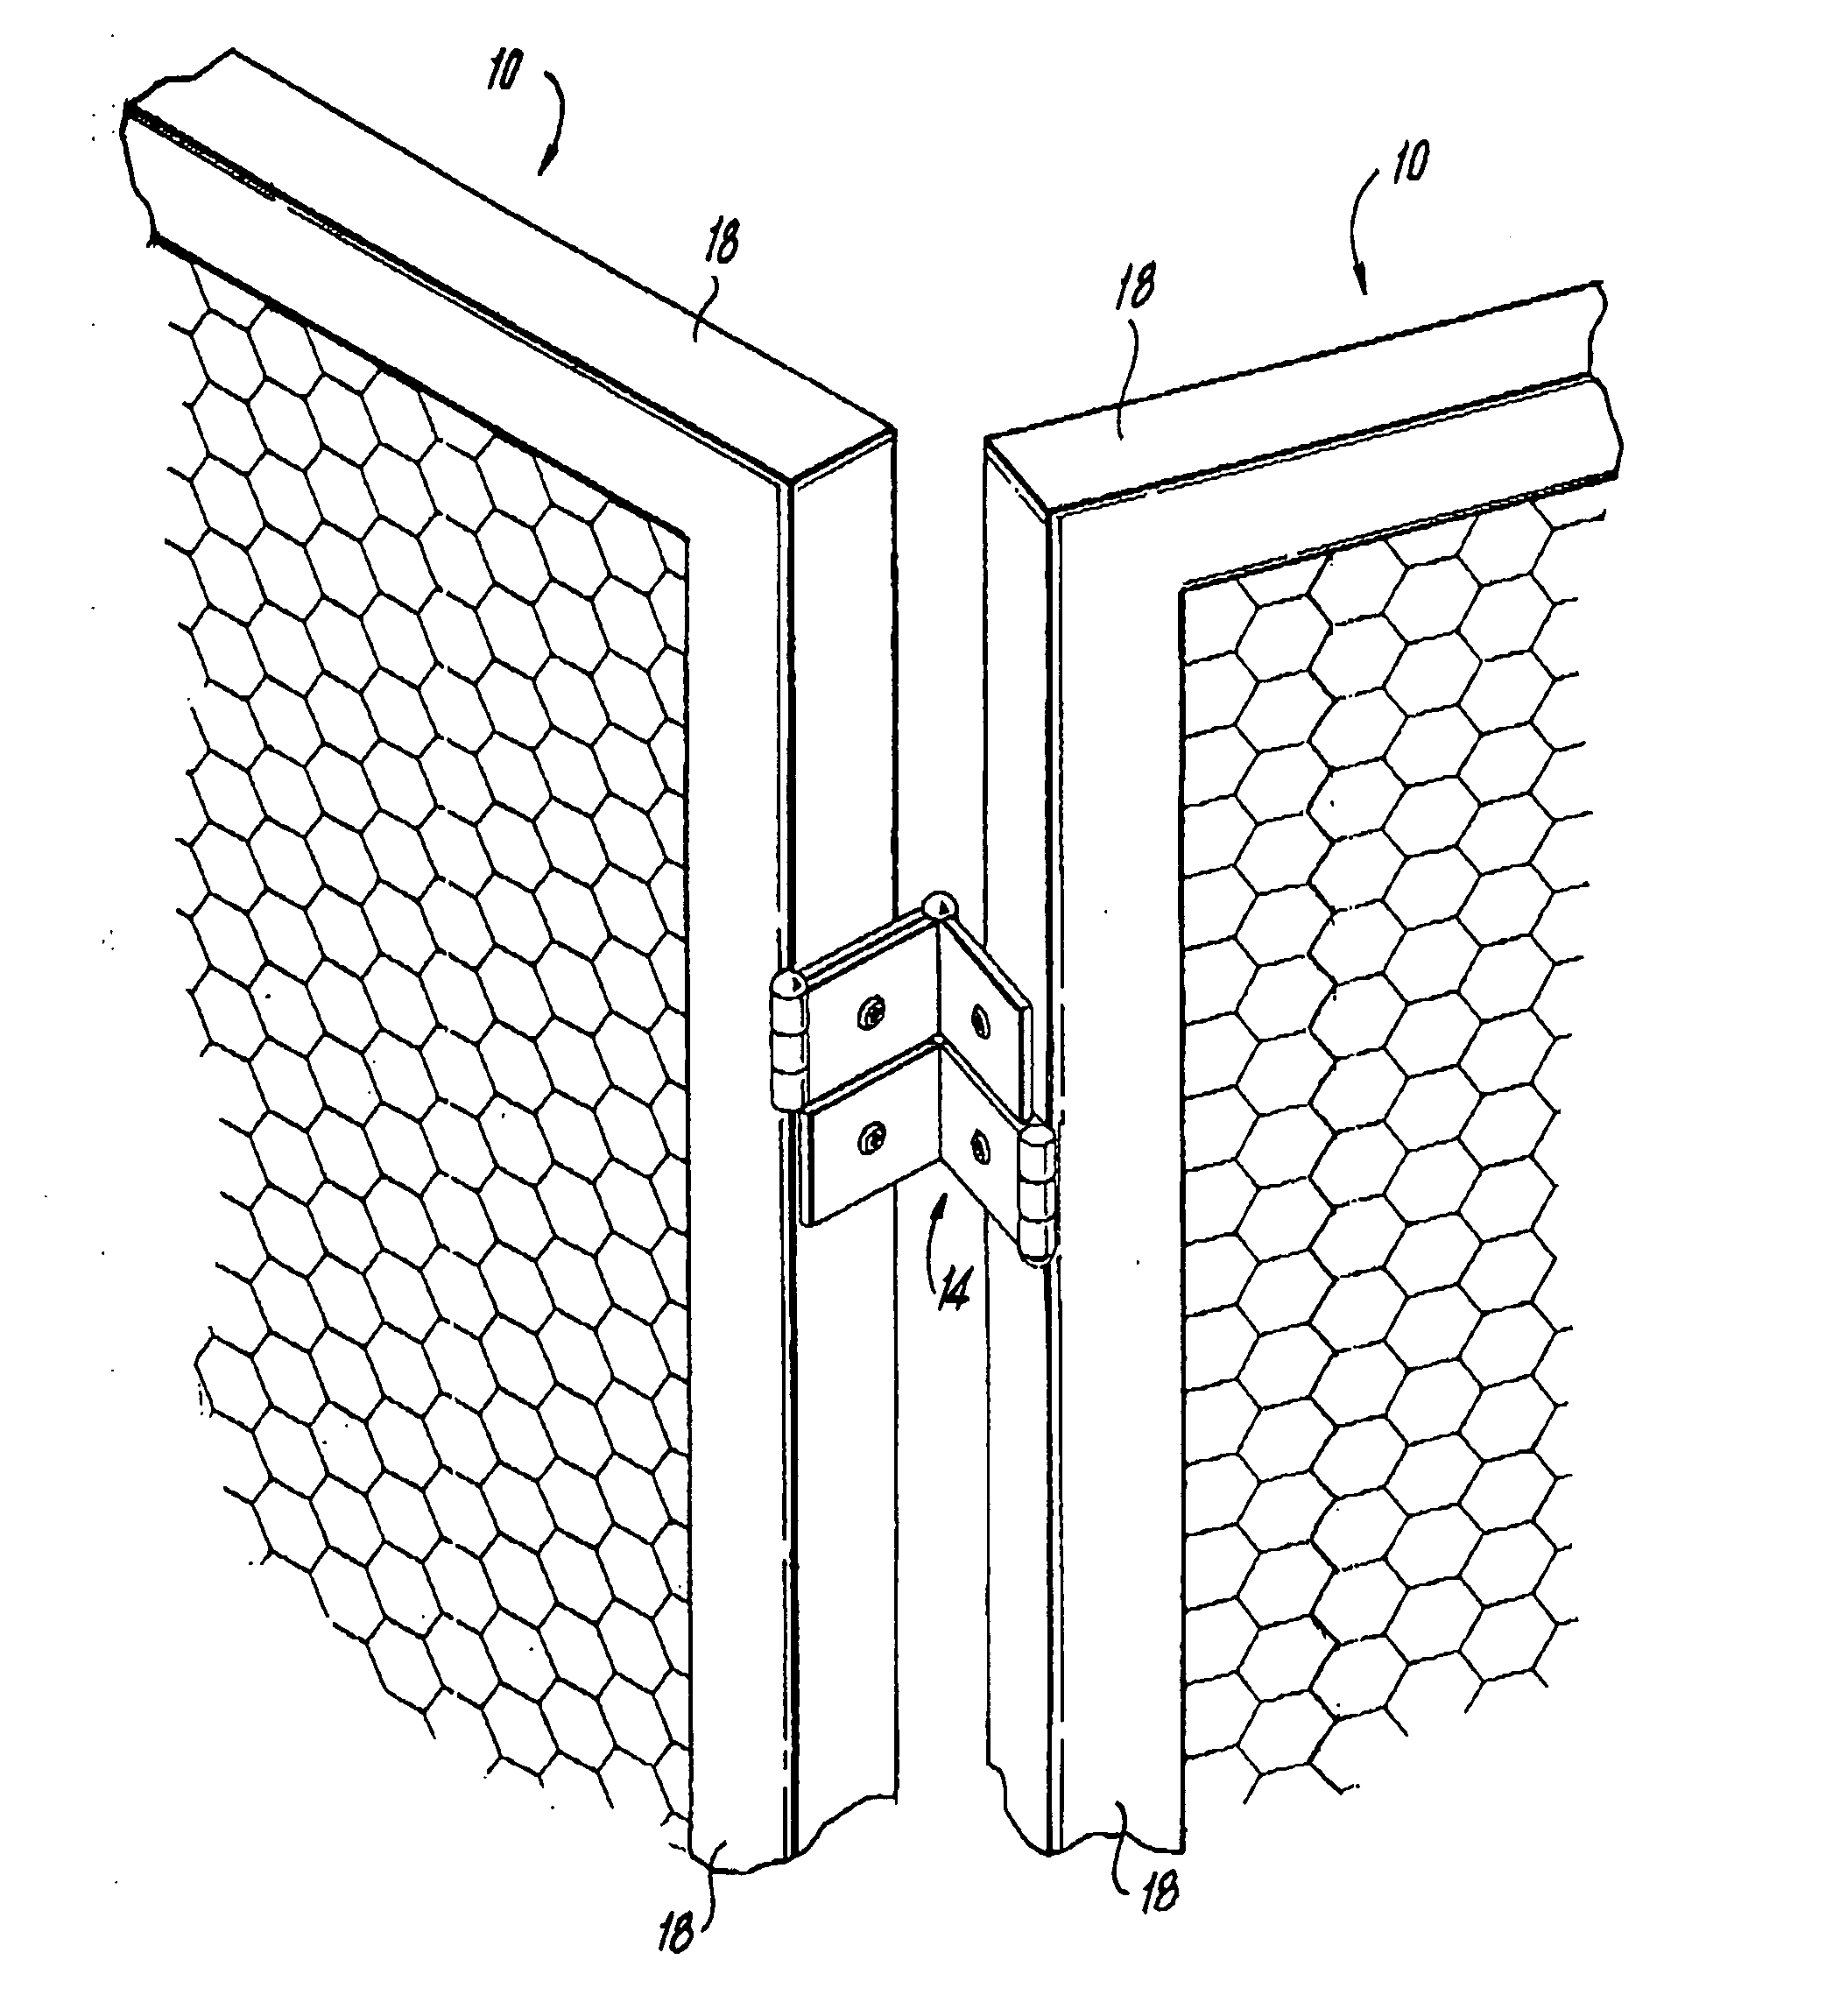 Method of retrofit installation of a portable swimming pool barrier fence